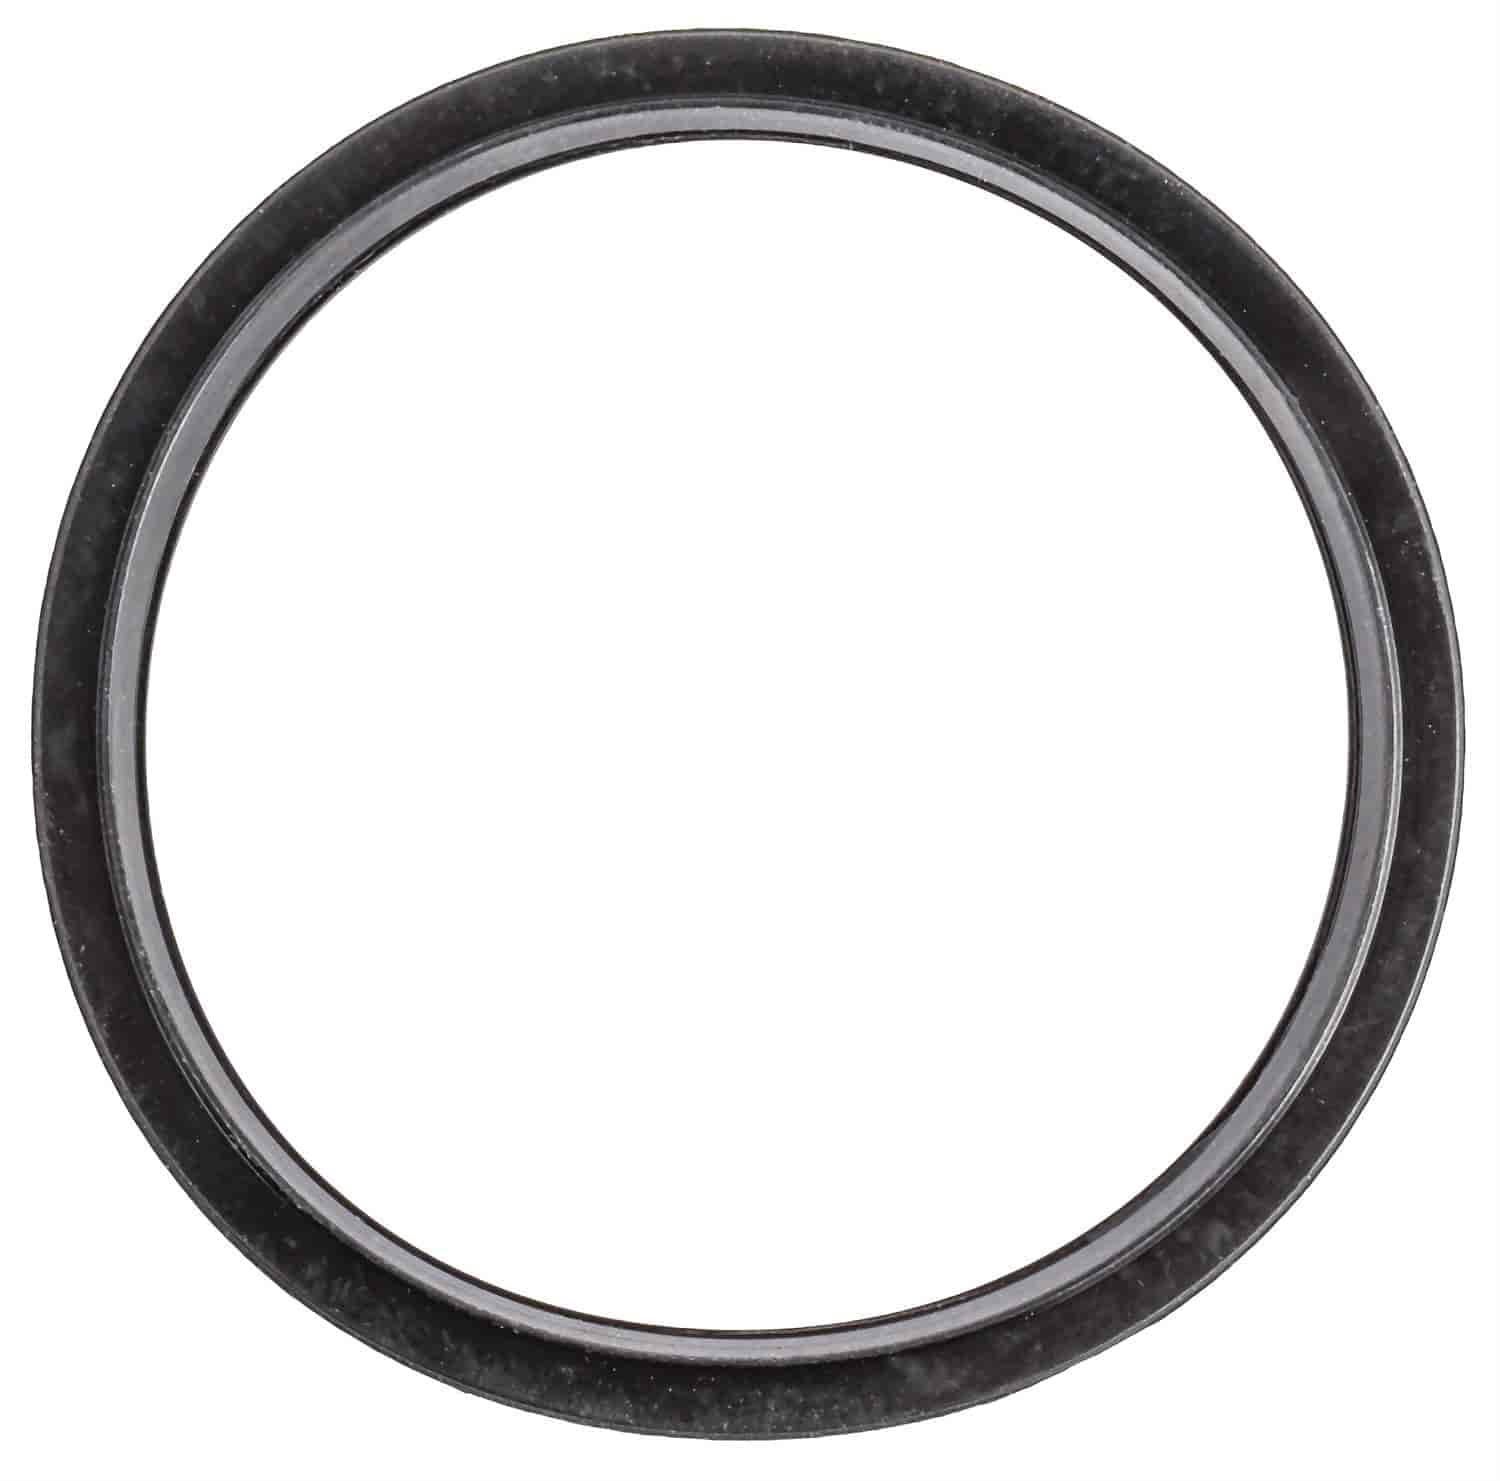 Thermostat Seal for 1992-1997 GM LT-Based Engines